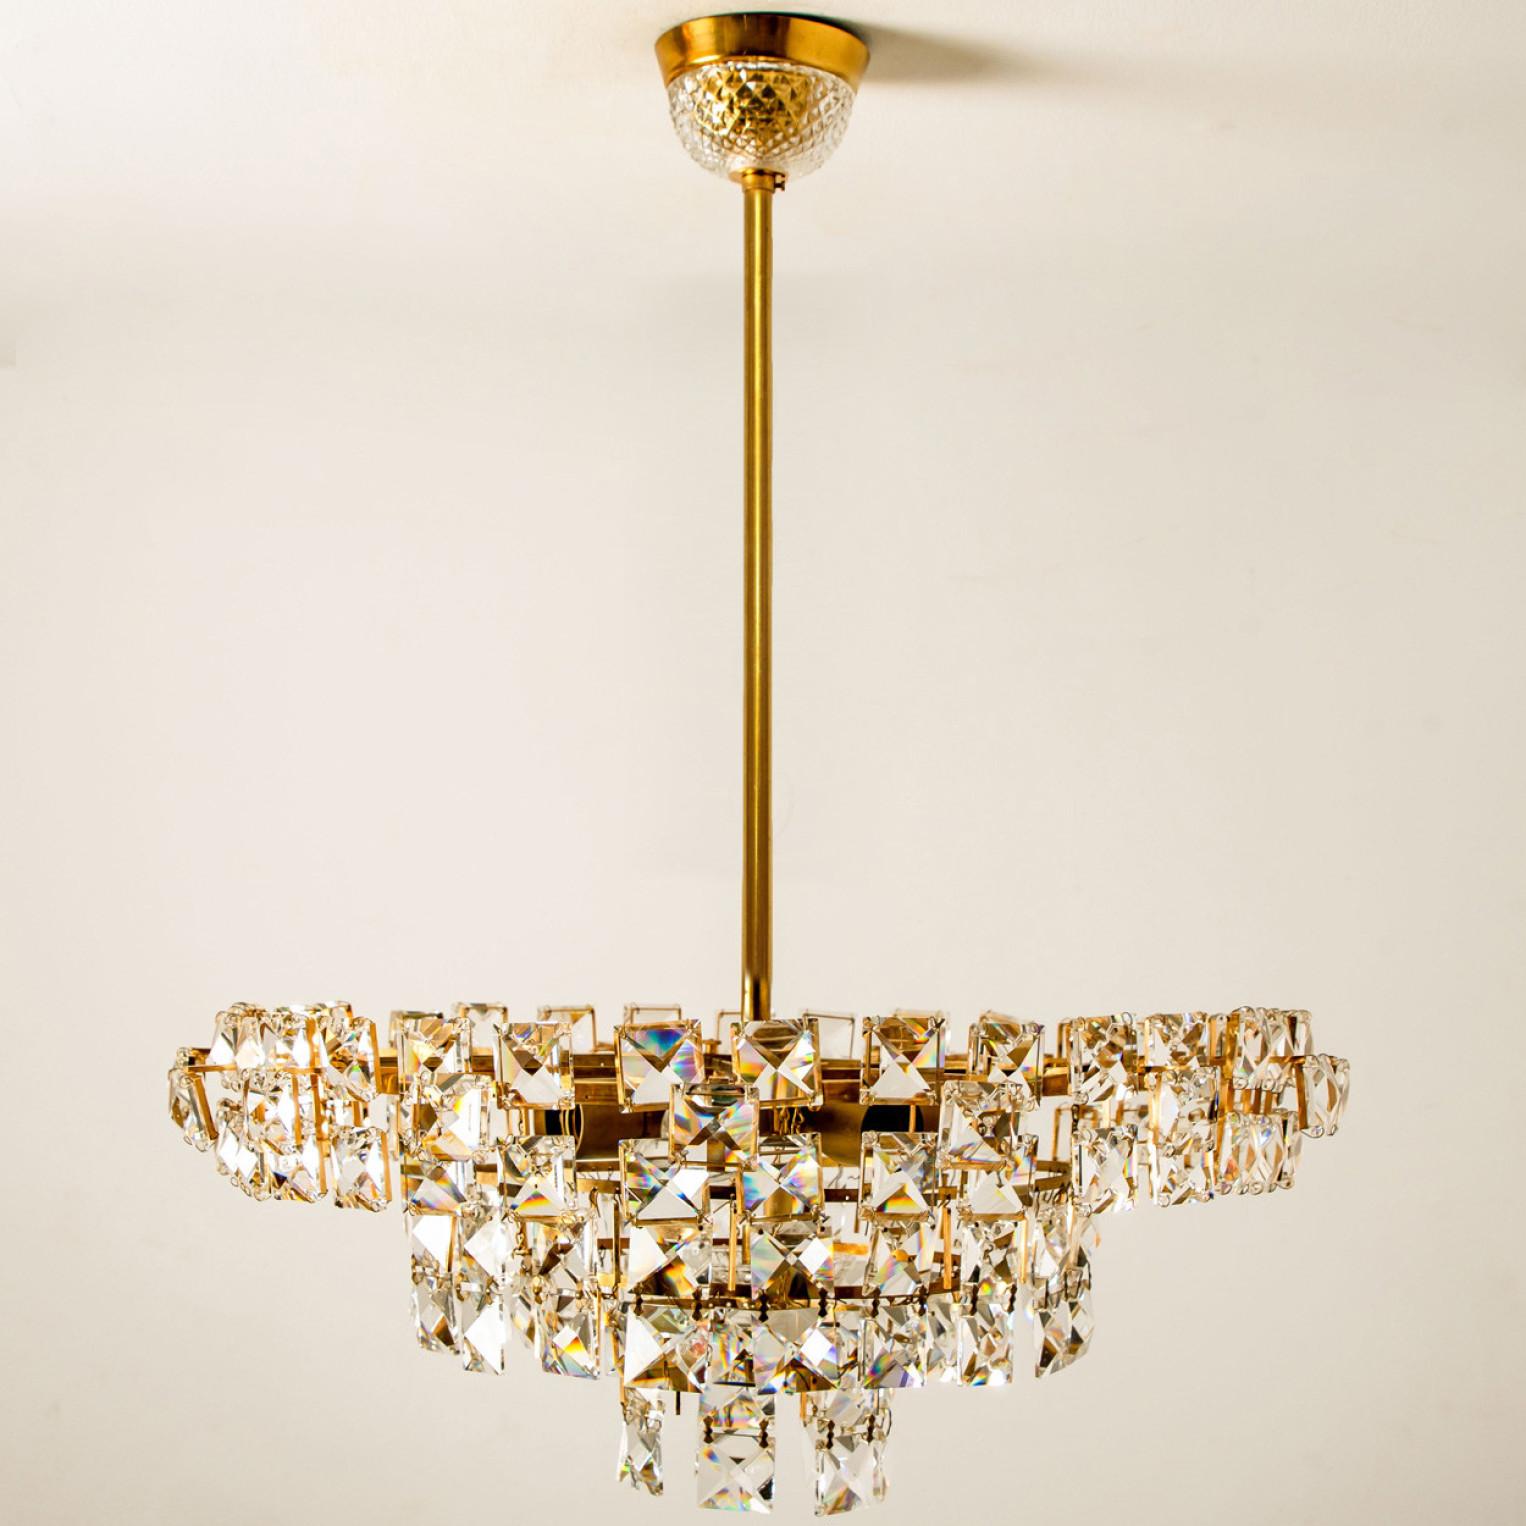 Very elegant chandelier by Bakalowits & Sohne, Austria. The chandelier is manufactured in circa 1960. With huge gem-like crystals and gilded brass frame. The crystals are meticulously cut in such a way that radiate the light of the bulbs in